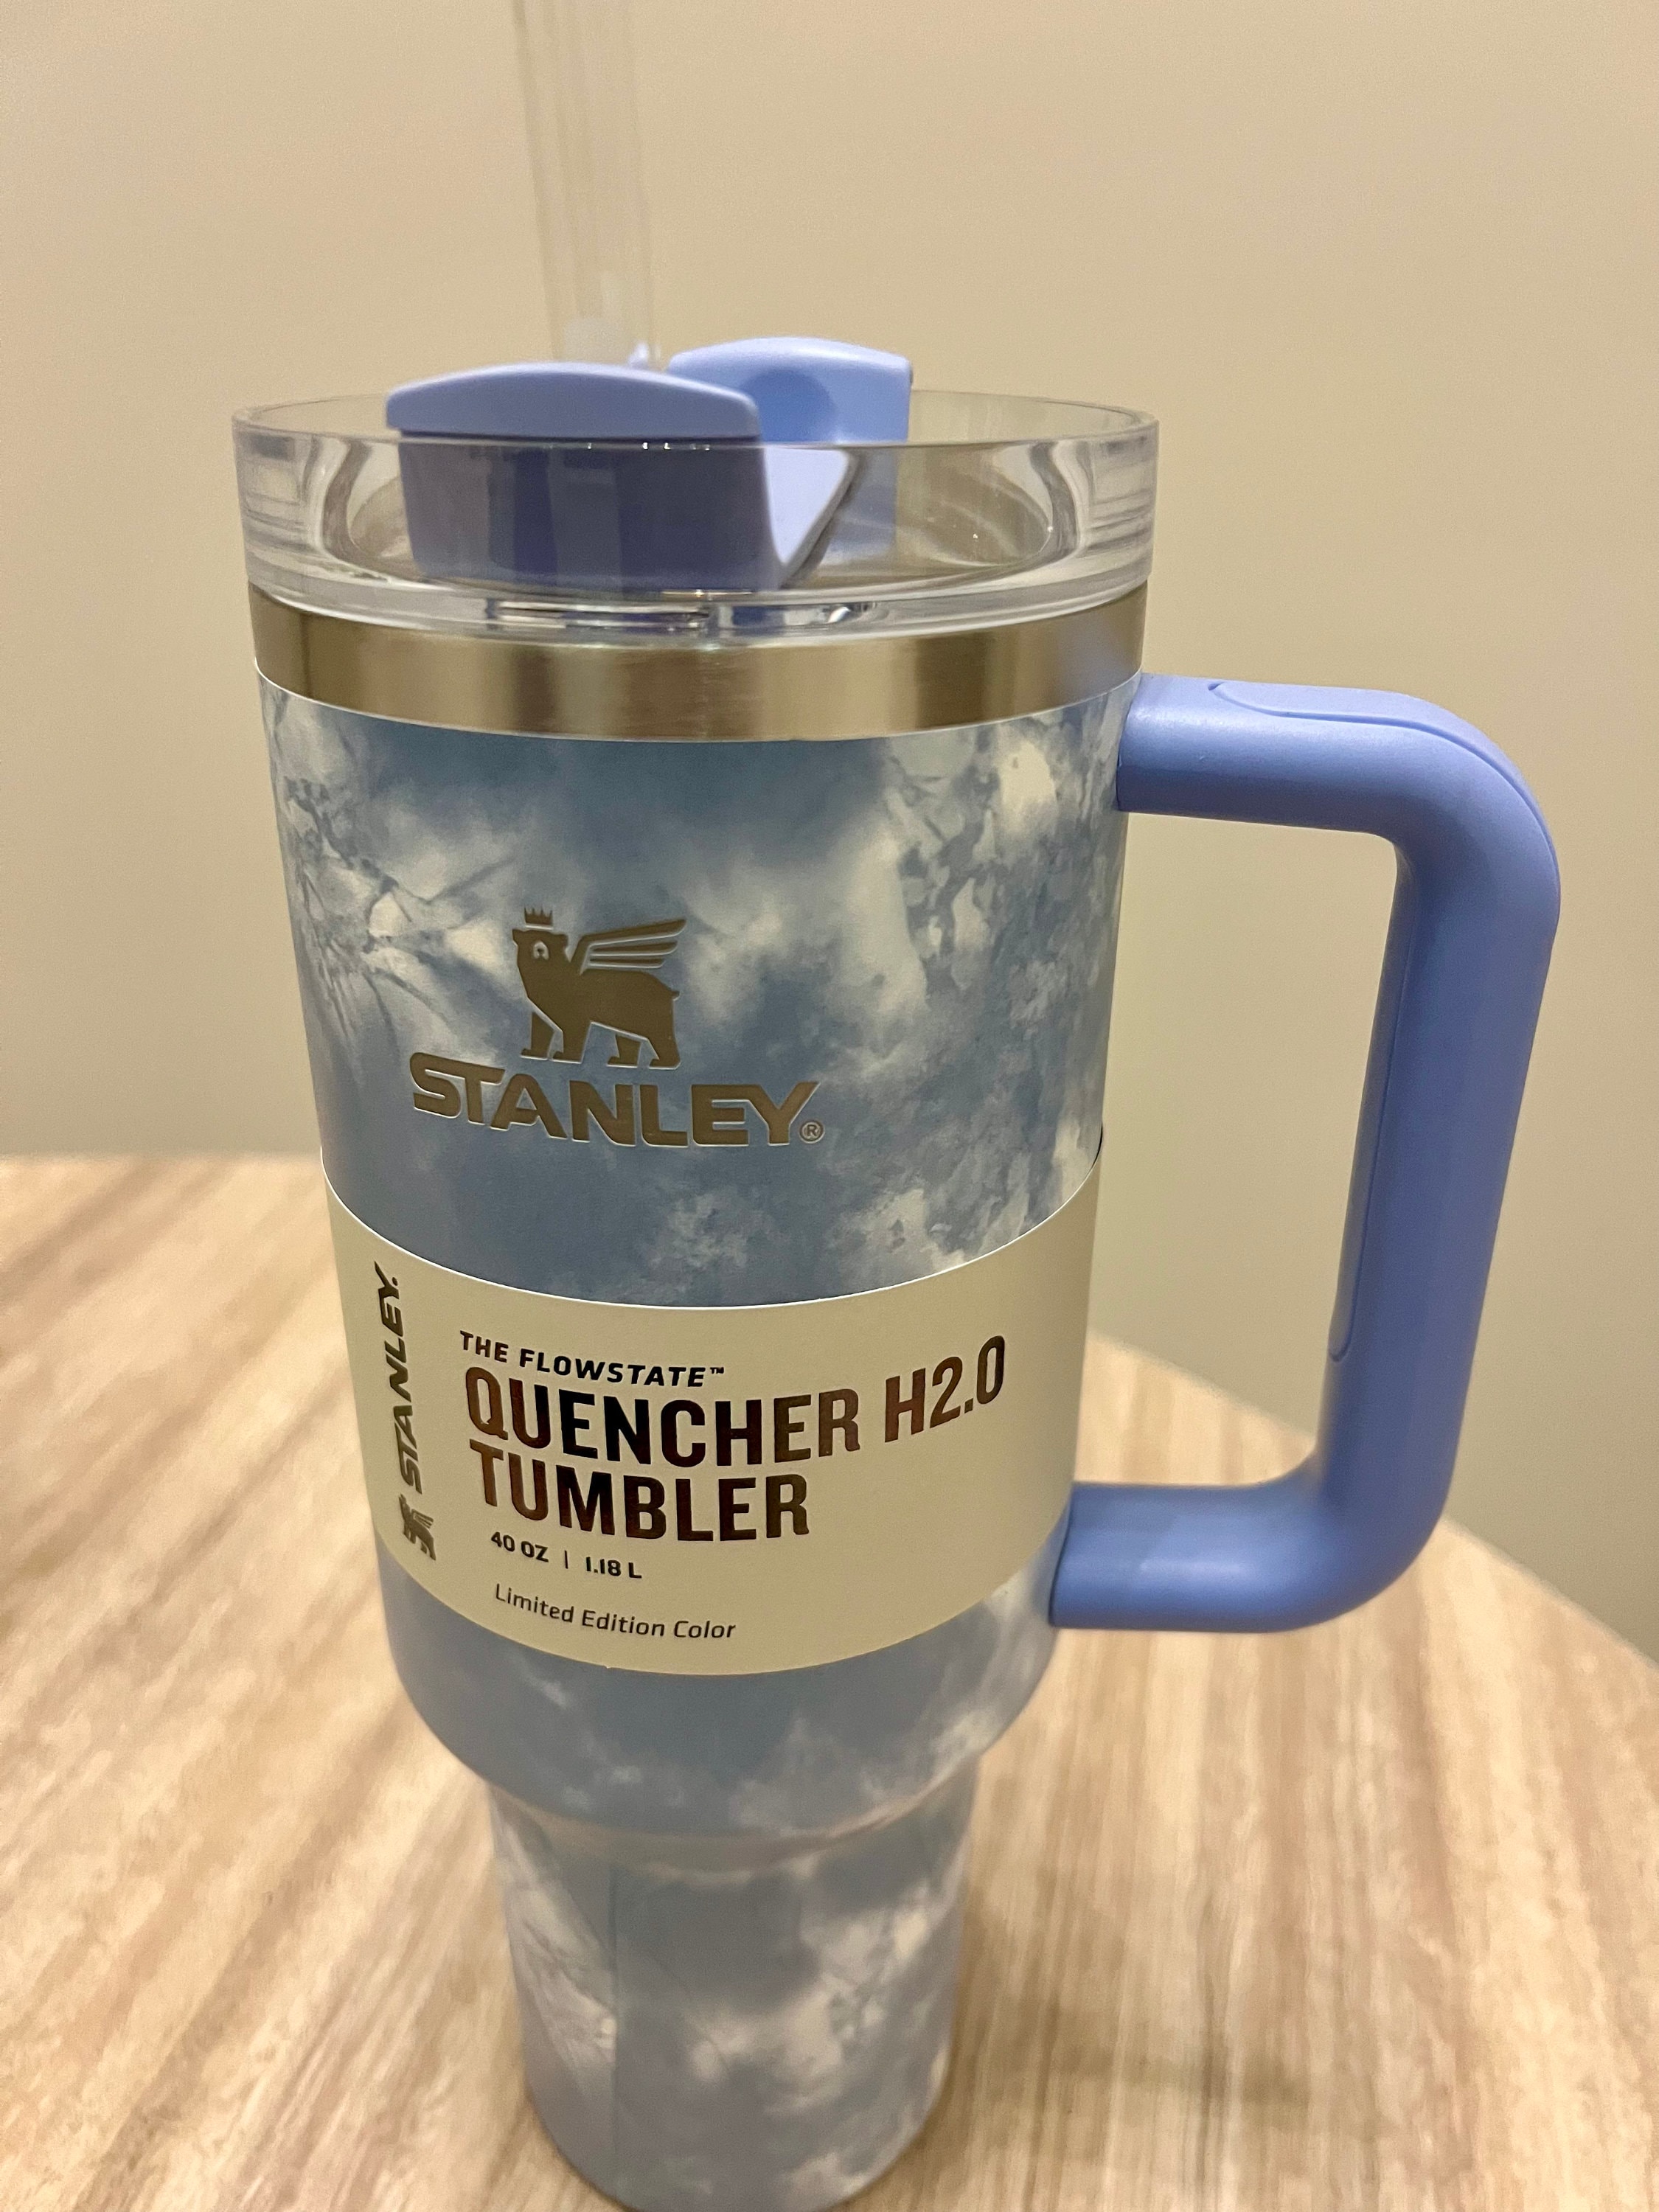 Capital One Taylor Swift 1989 Stanley Cup Inspired By Capital One Swifties  Merch Giveaway Stainless Steel Tumbler Twitter Travel Mug 2024 Taylors  Version - Laughinks